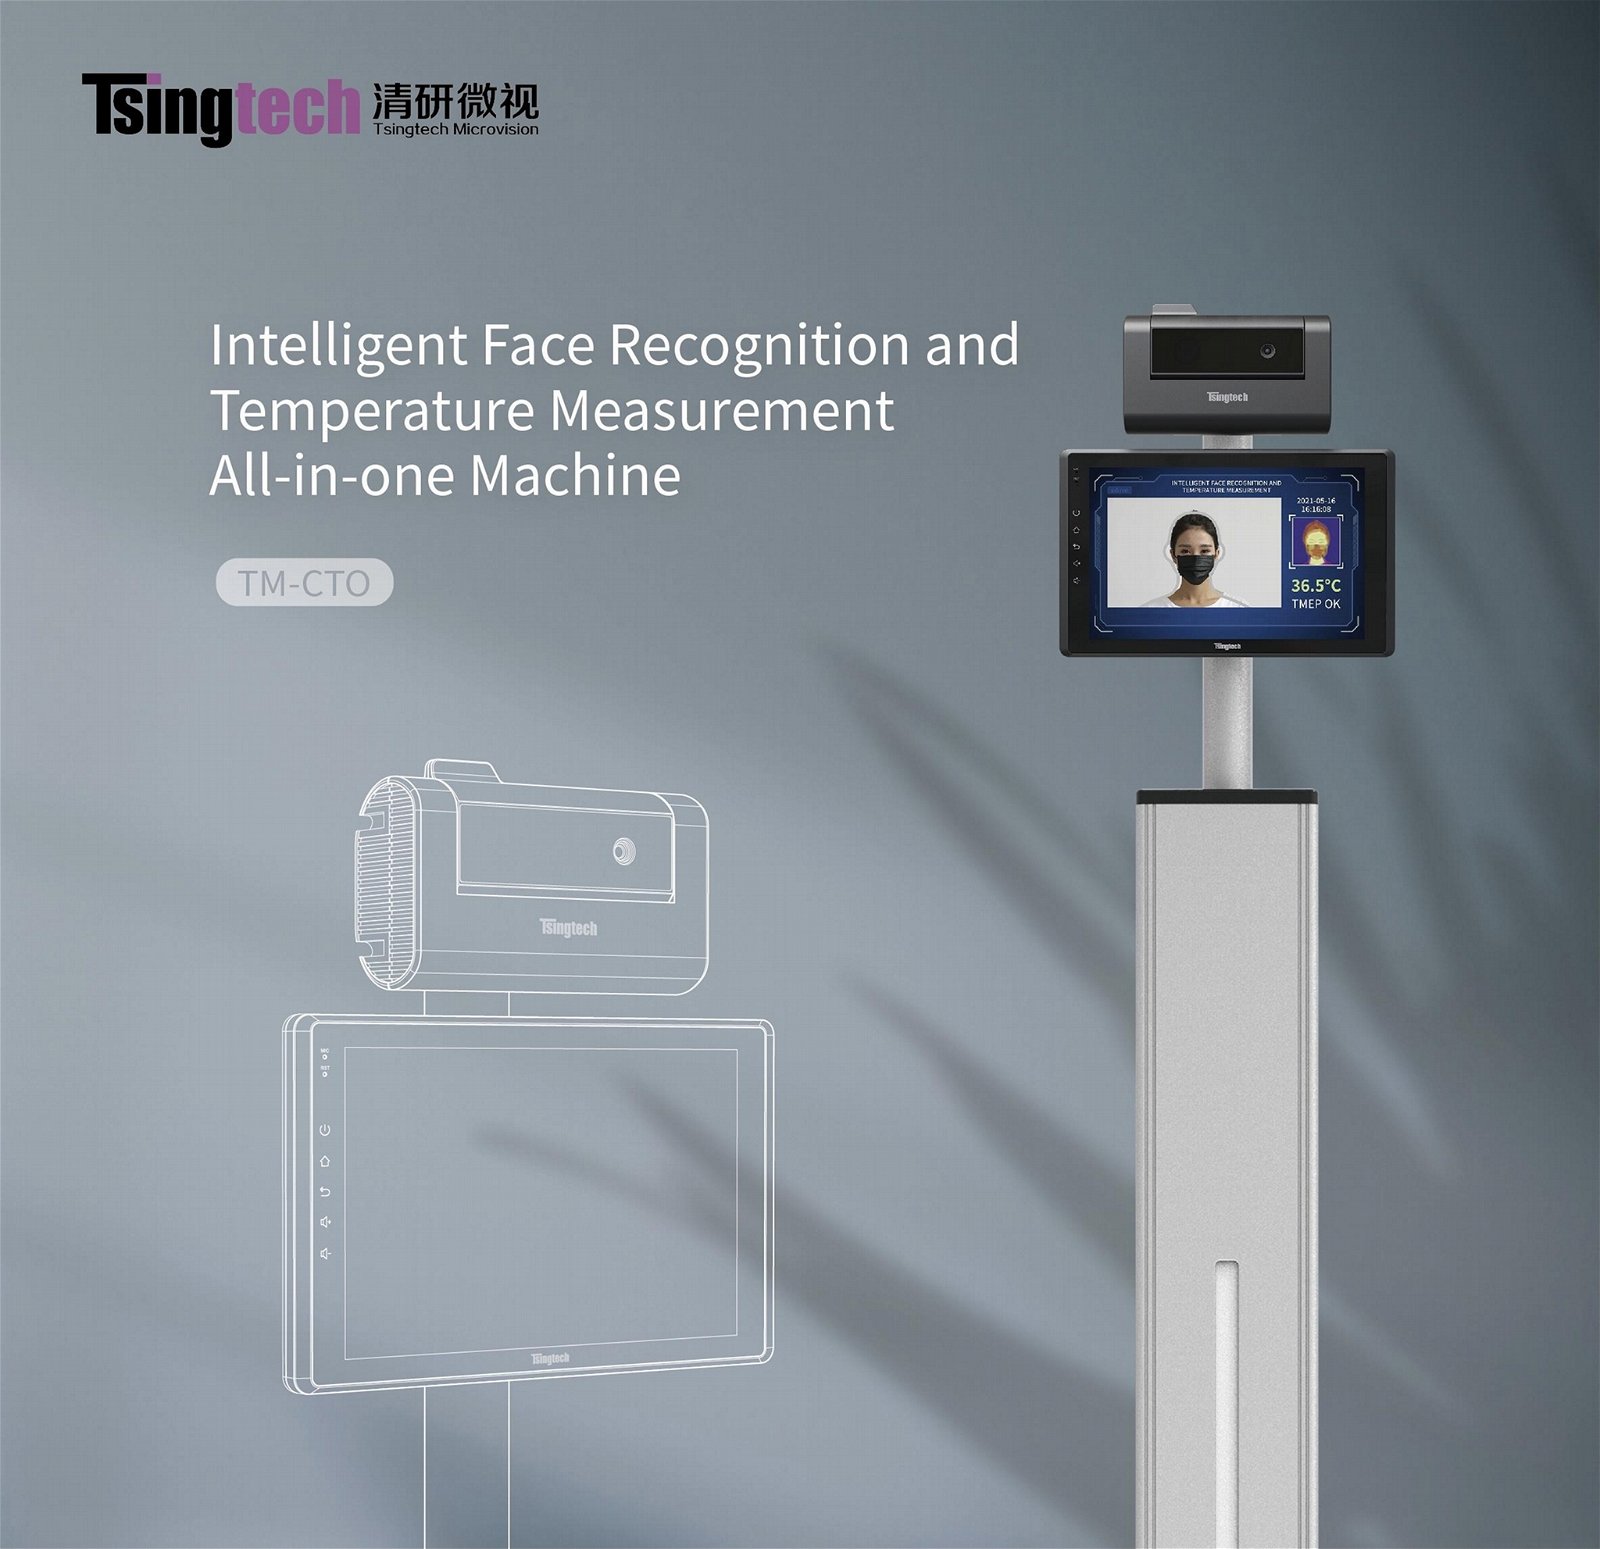 Intelligent Face Recognition and Temperature Measurement All-in-one Machine